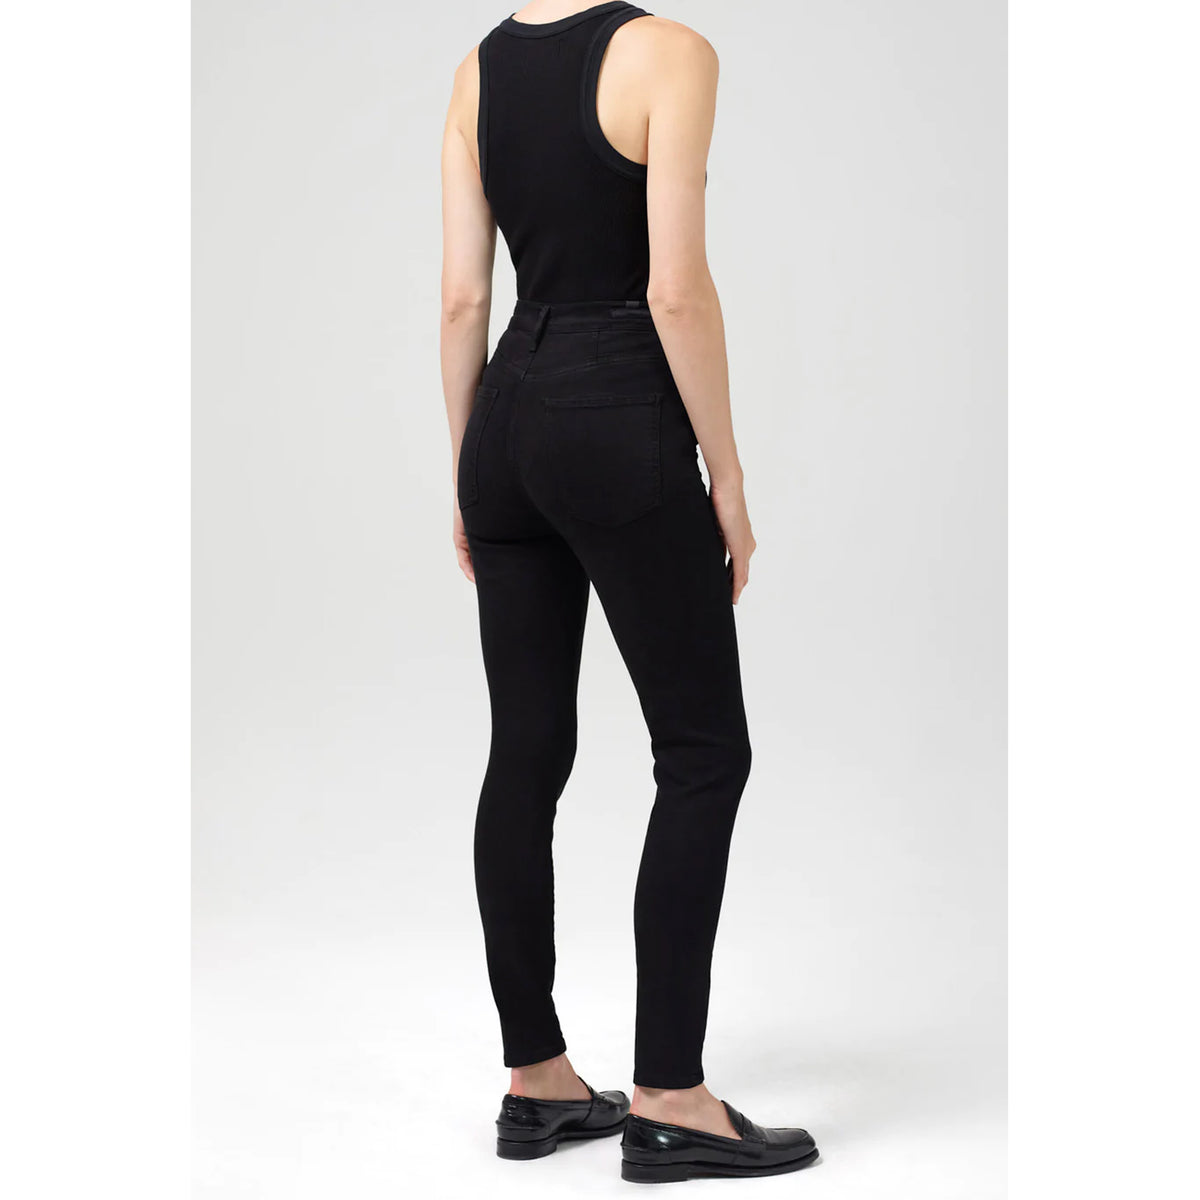 Citizens of Humanity Chrissy High Rise Skinny in Plush Black